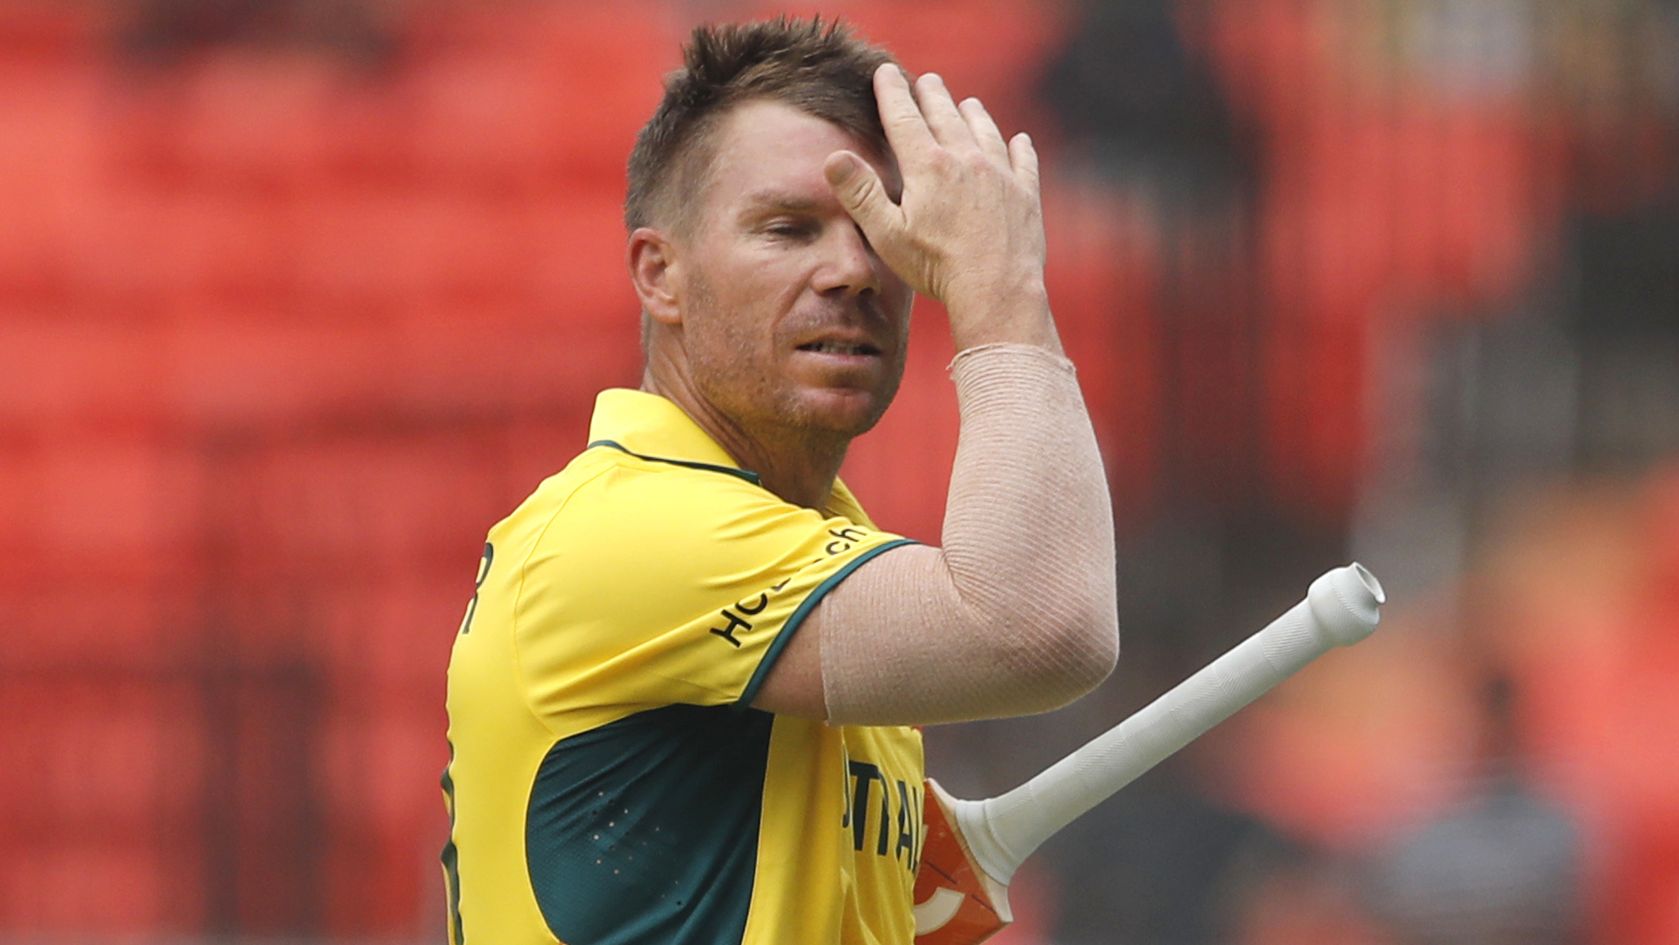 HYDERABAD, INDIA - OCTOBER 3: David Warner of Australia makes their way off after being dismissed during the ICC Men&#x27;s Cricket World Cup India 2023 warm up match between Pakistan and Australia at Rajiv Gandhi International Stadium on October 3, 2023 in Hyderabad, India. (Photo by Pankaj Nangia/Getty Images)